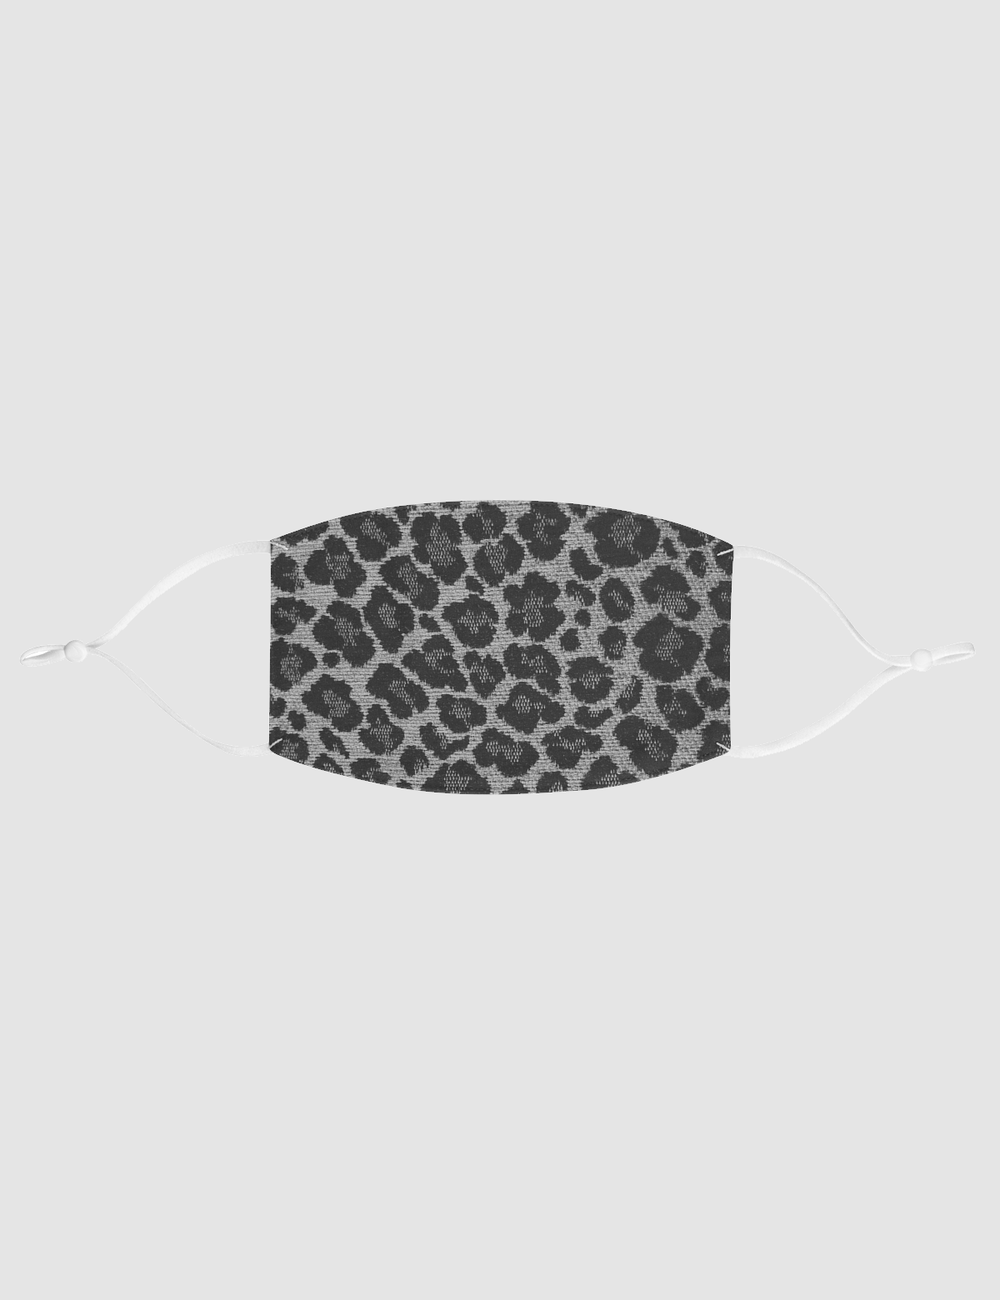 Vintage Grey Leopard Print Pattern | Two-Layer Polyester Fabric Face Mask OniTakai